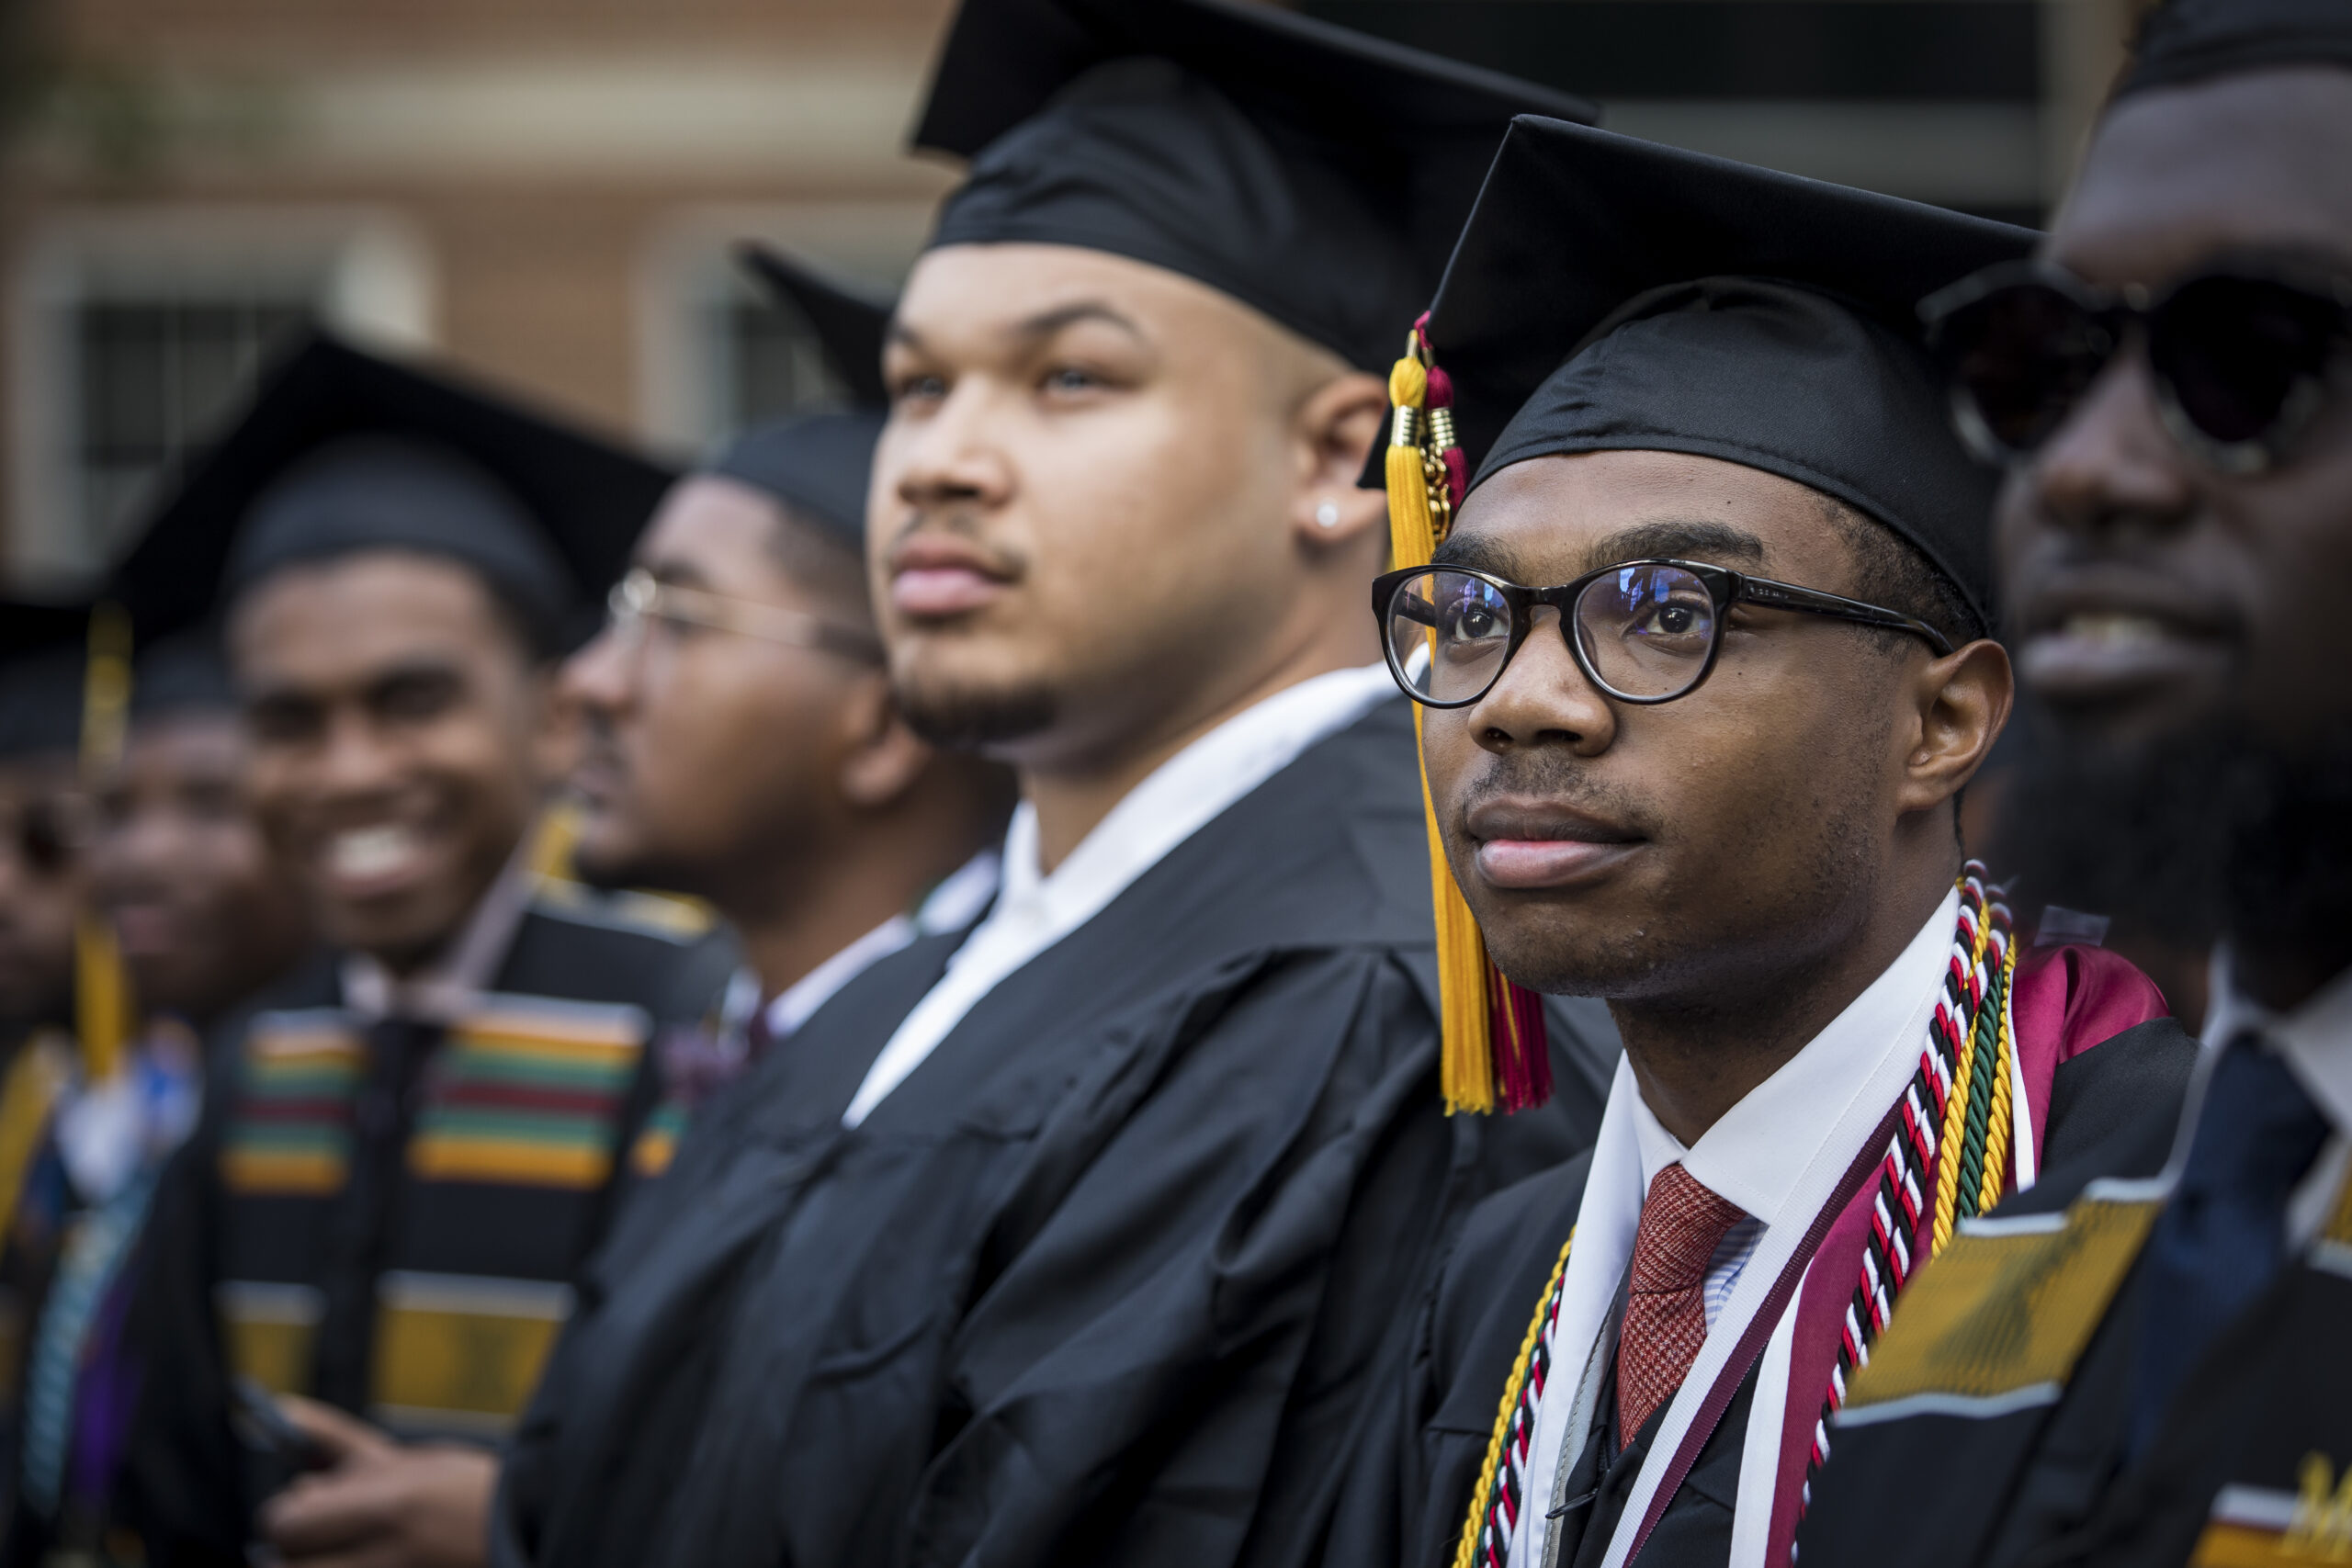 $80 Million Donation To Fund Education For 400 Students At Morehouse